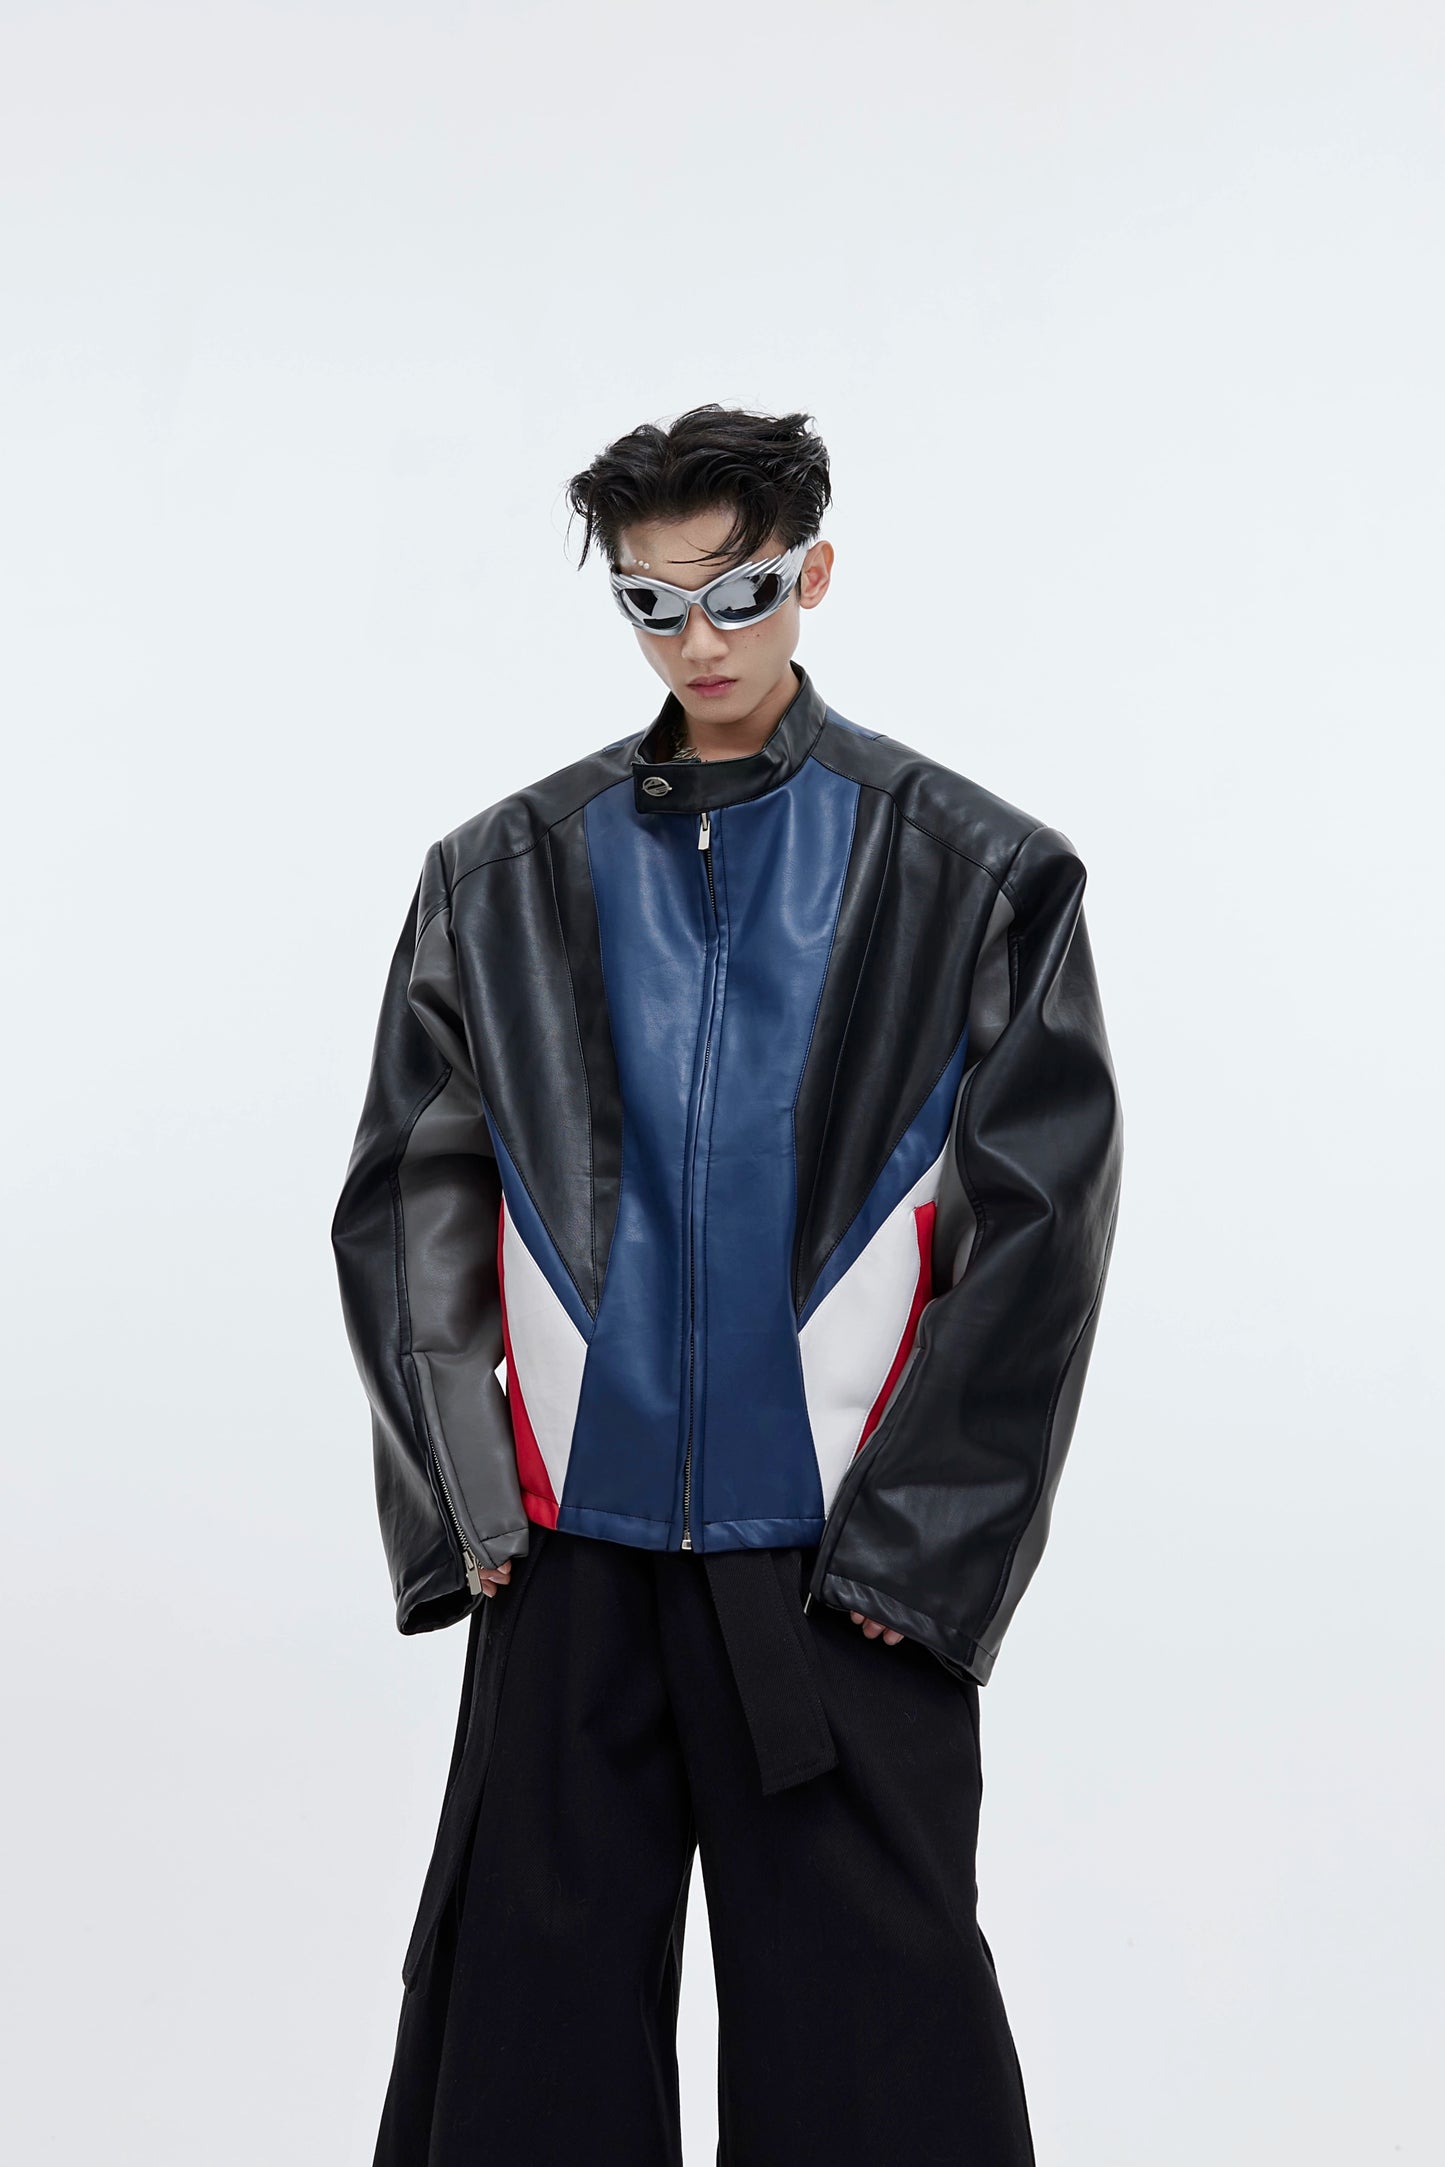 Cultur E24ss spring style niche deconstructed stitching contrasting biker suit PU leather padded shoulder silhouette jacket jacket